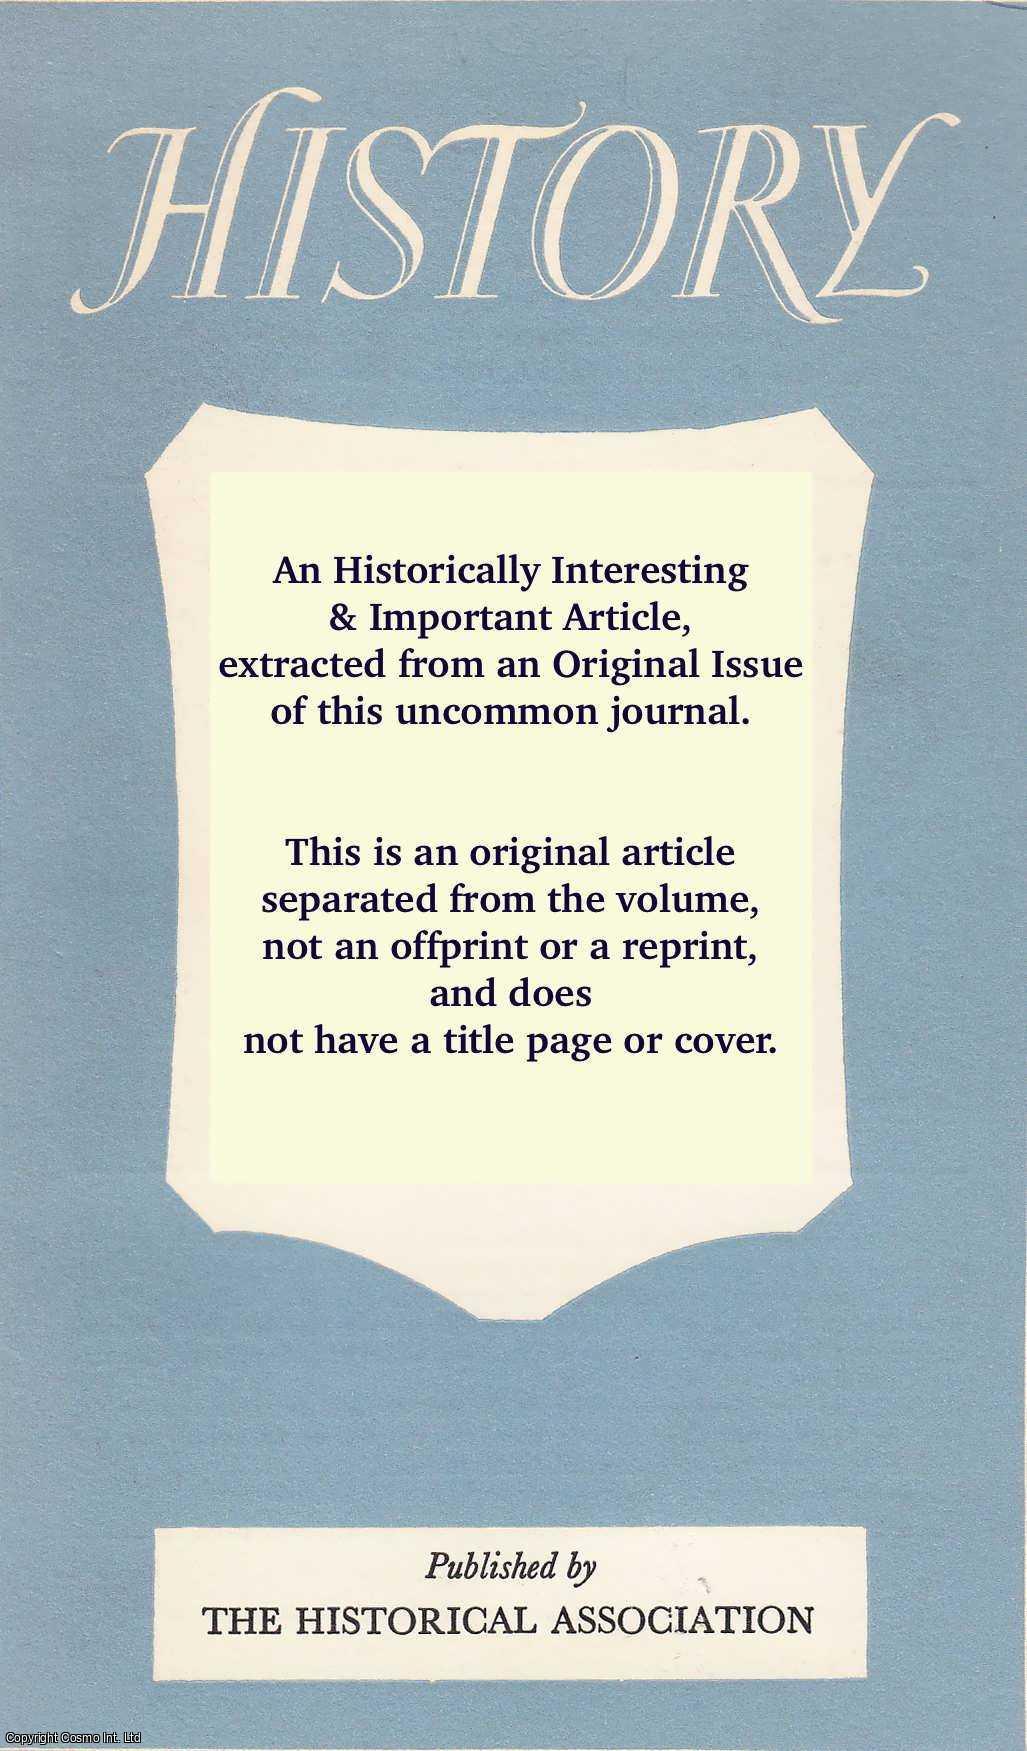 E.W. Adams - The Nature of Historical Repetition. An original article from the Quarterly Journal of the Historical Association, 1928.